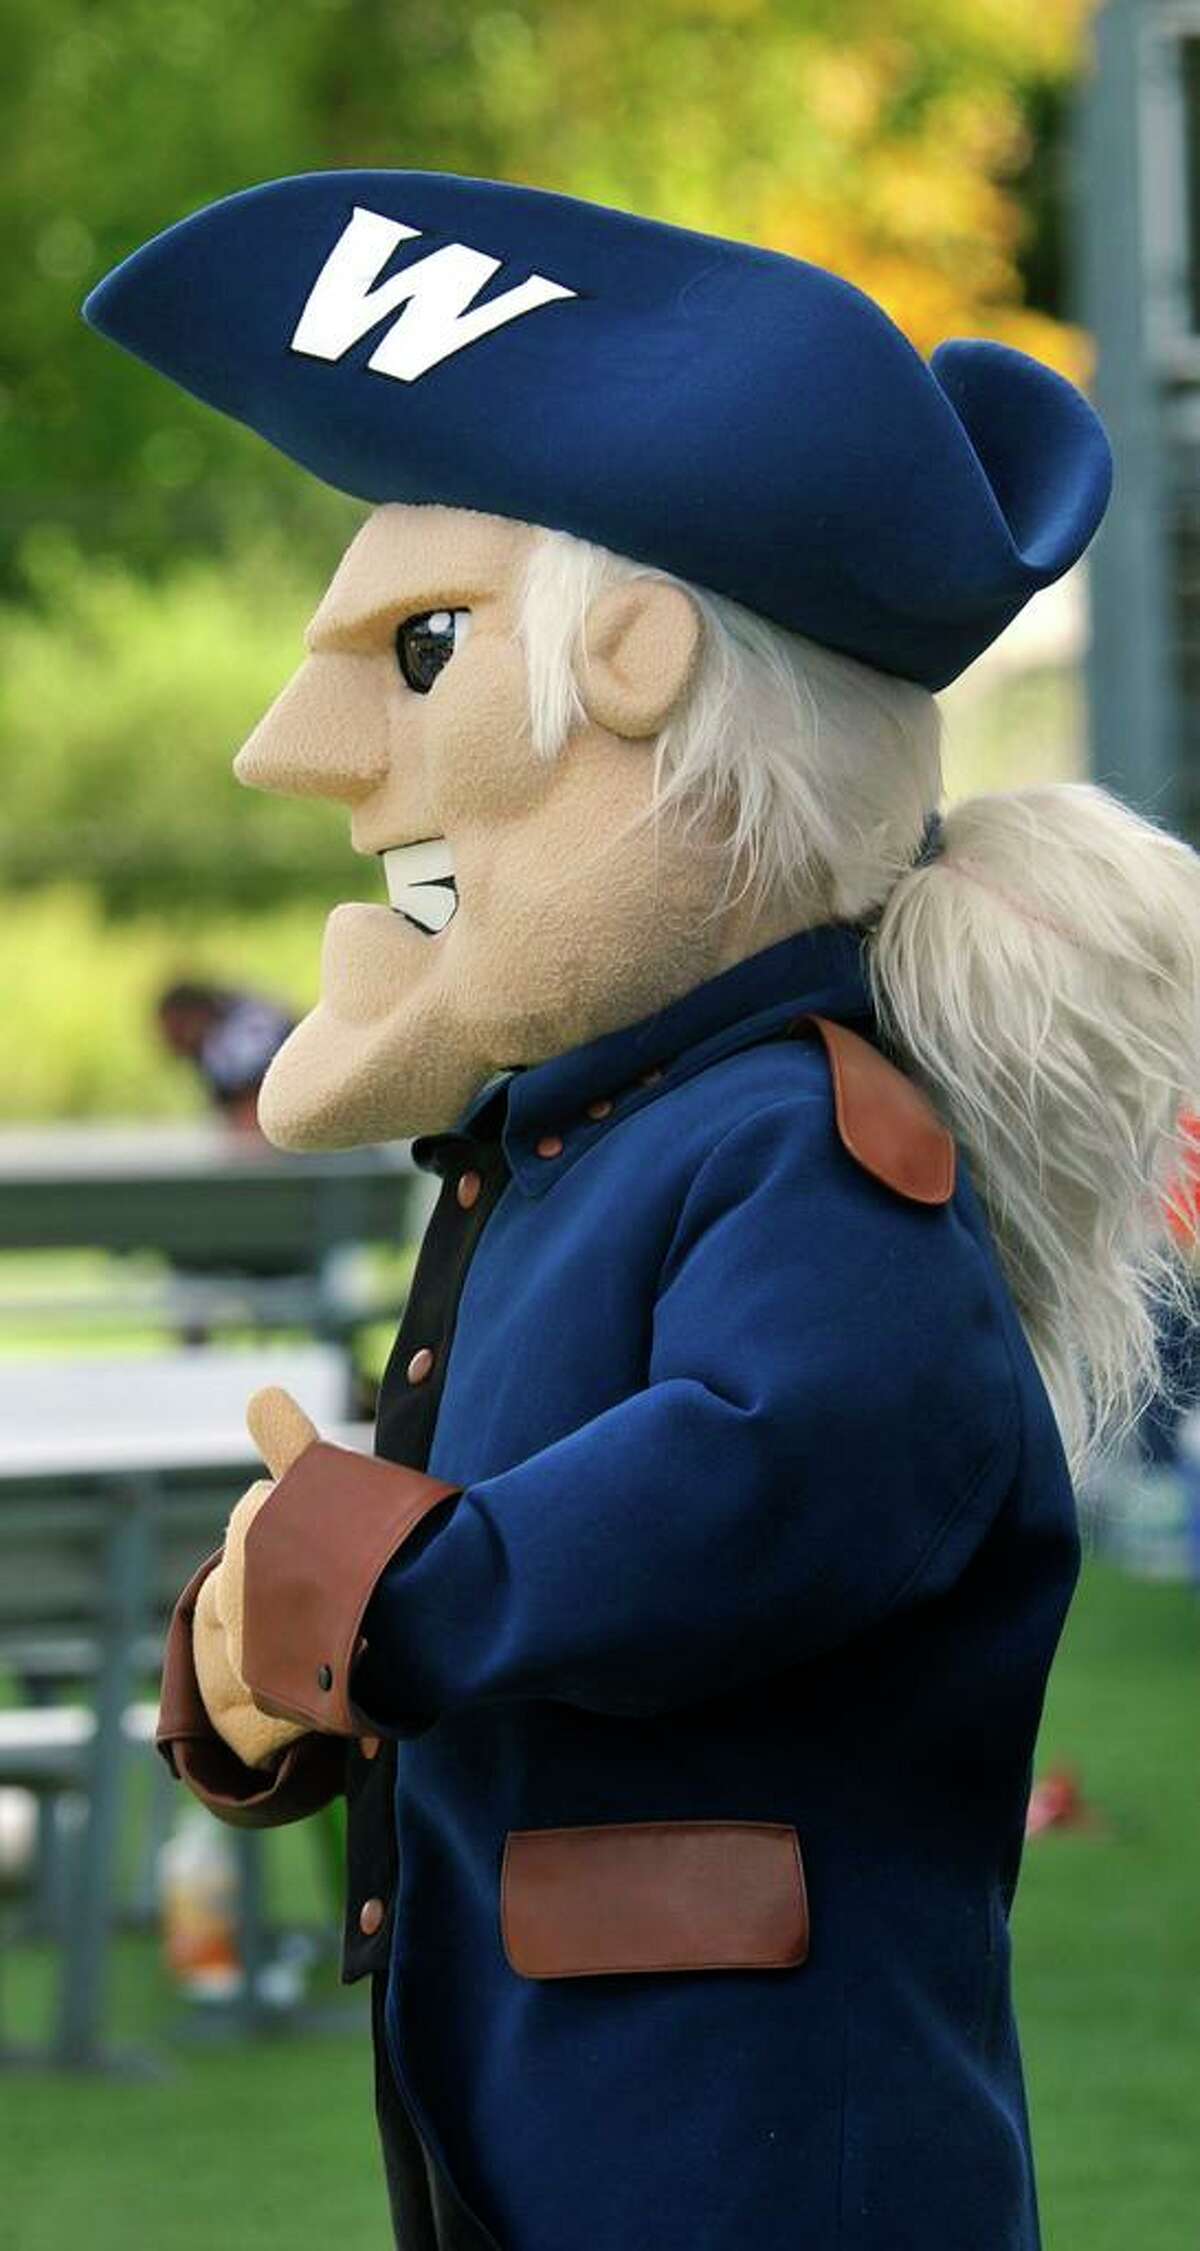 Colonial Chuck, the mascot of Western Connecticut State University.